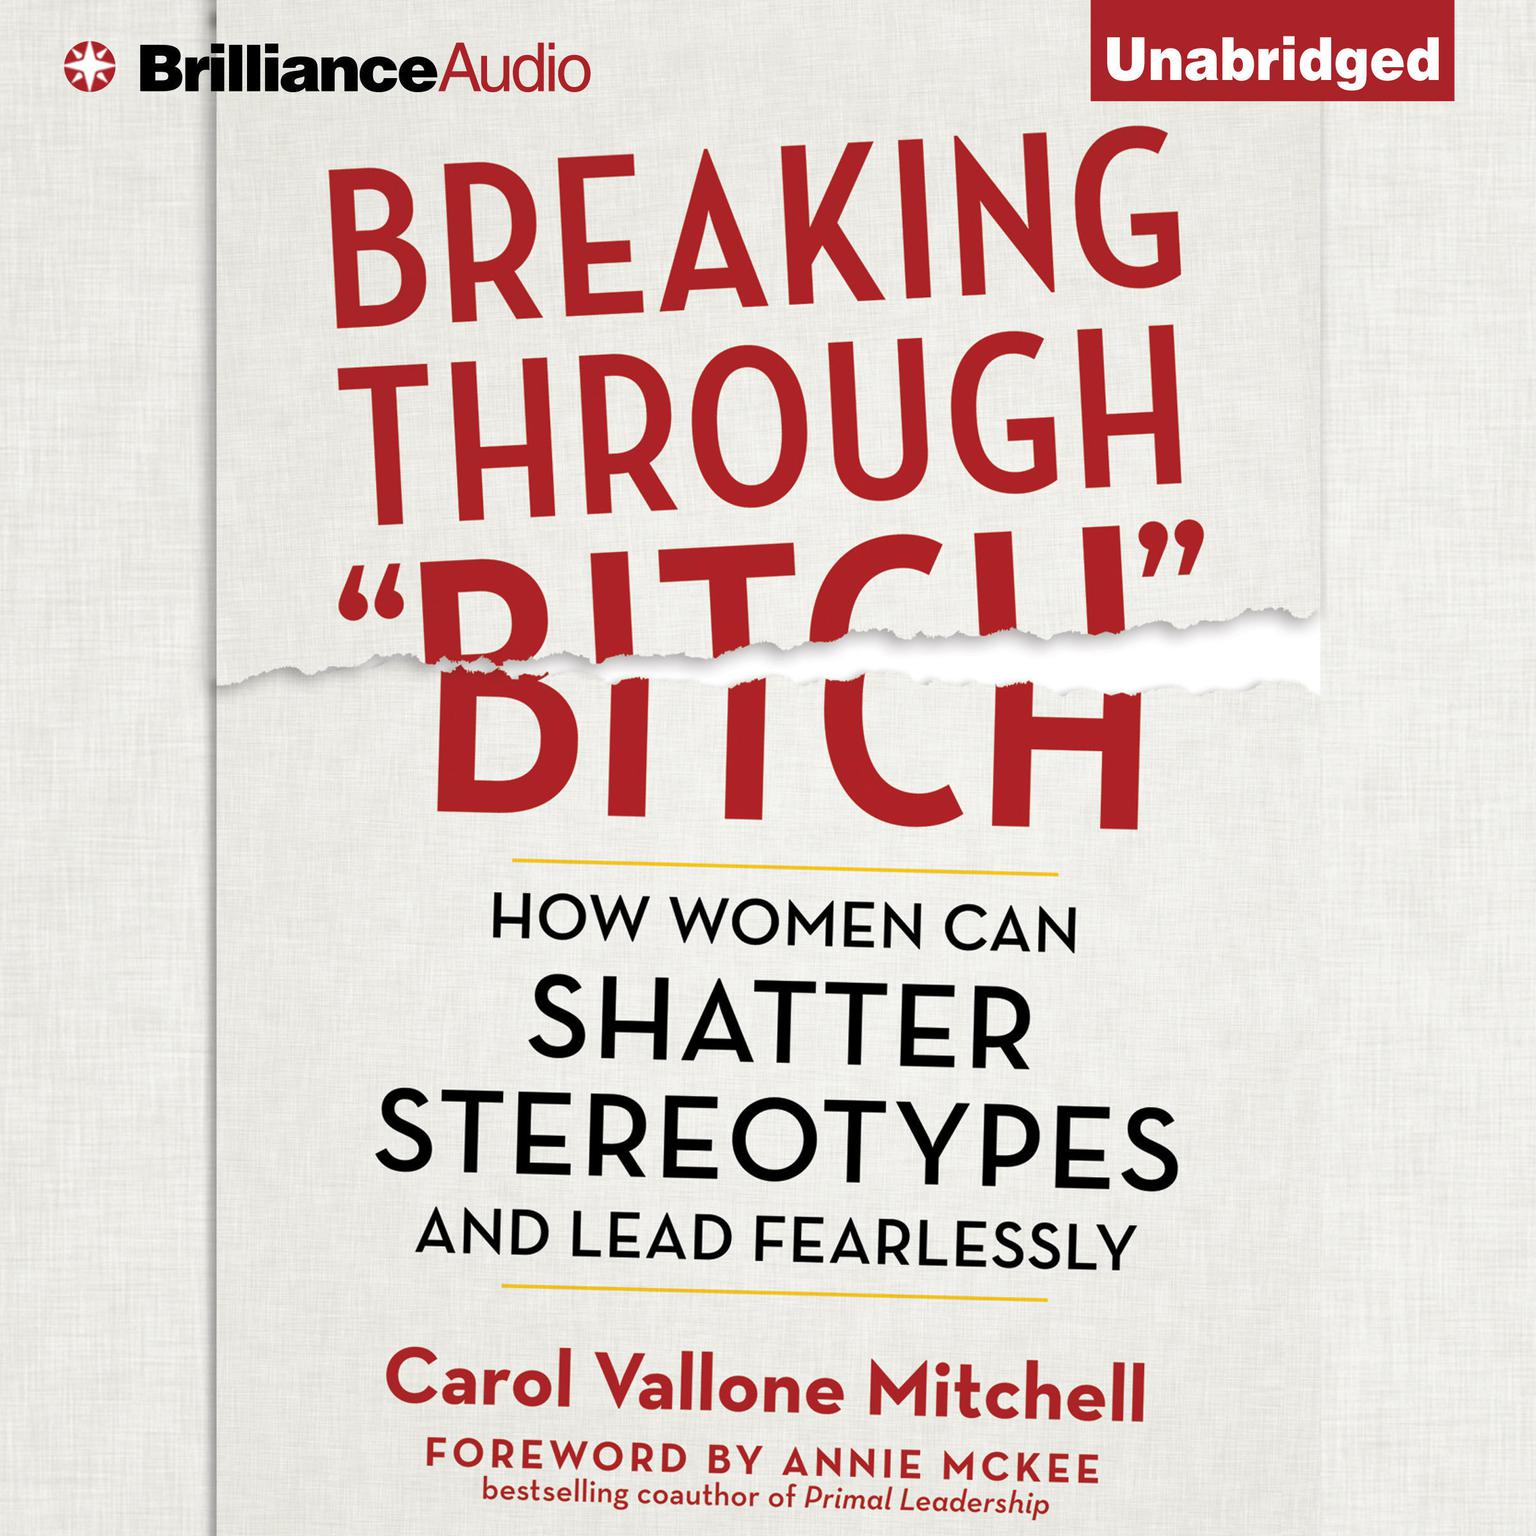 Breaking Through Bitch: How Women Can Shatter Stereotypes and Lead Fearlessly Audiobook, by Carol Vallone Mitchell